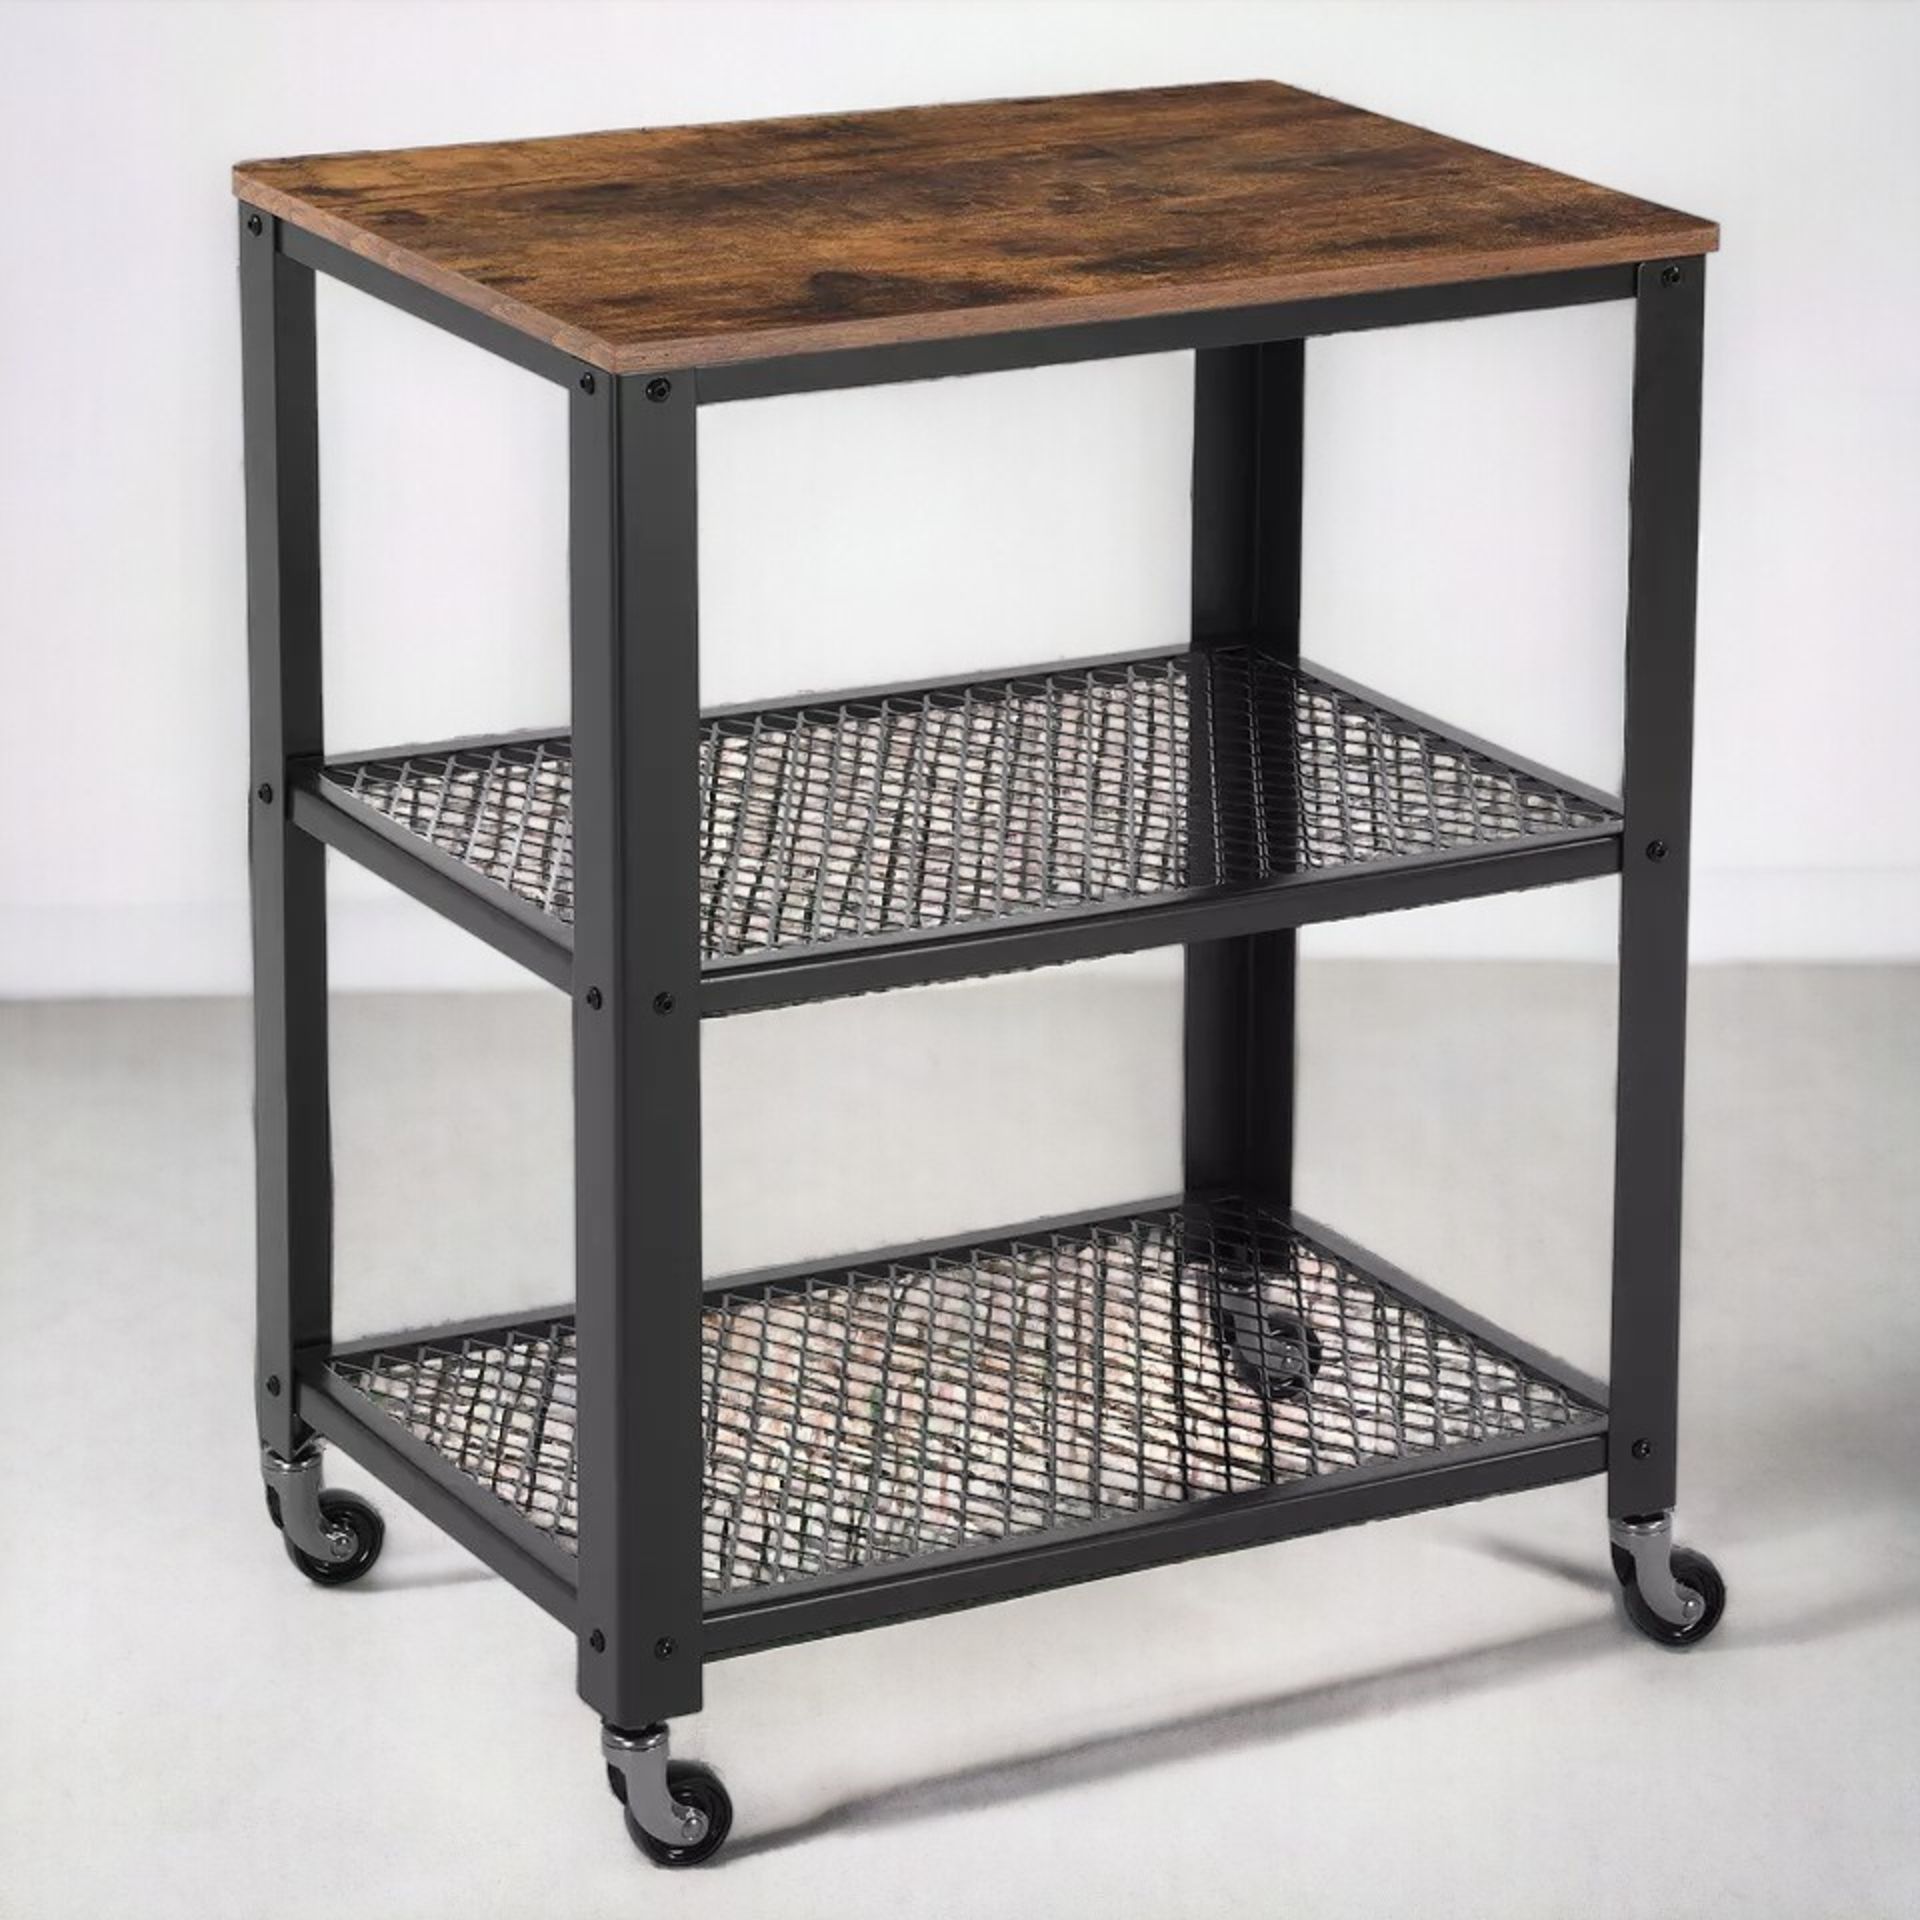 FREE DELIVERY - BRAND NEW 3-TIER KITCHEN CART TROLLEY ROLLING UTILITY CART, HEAVY STORAGE - Image 2 of 2